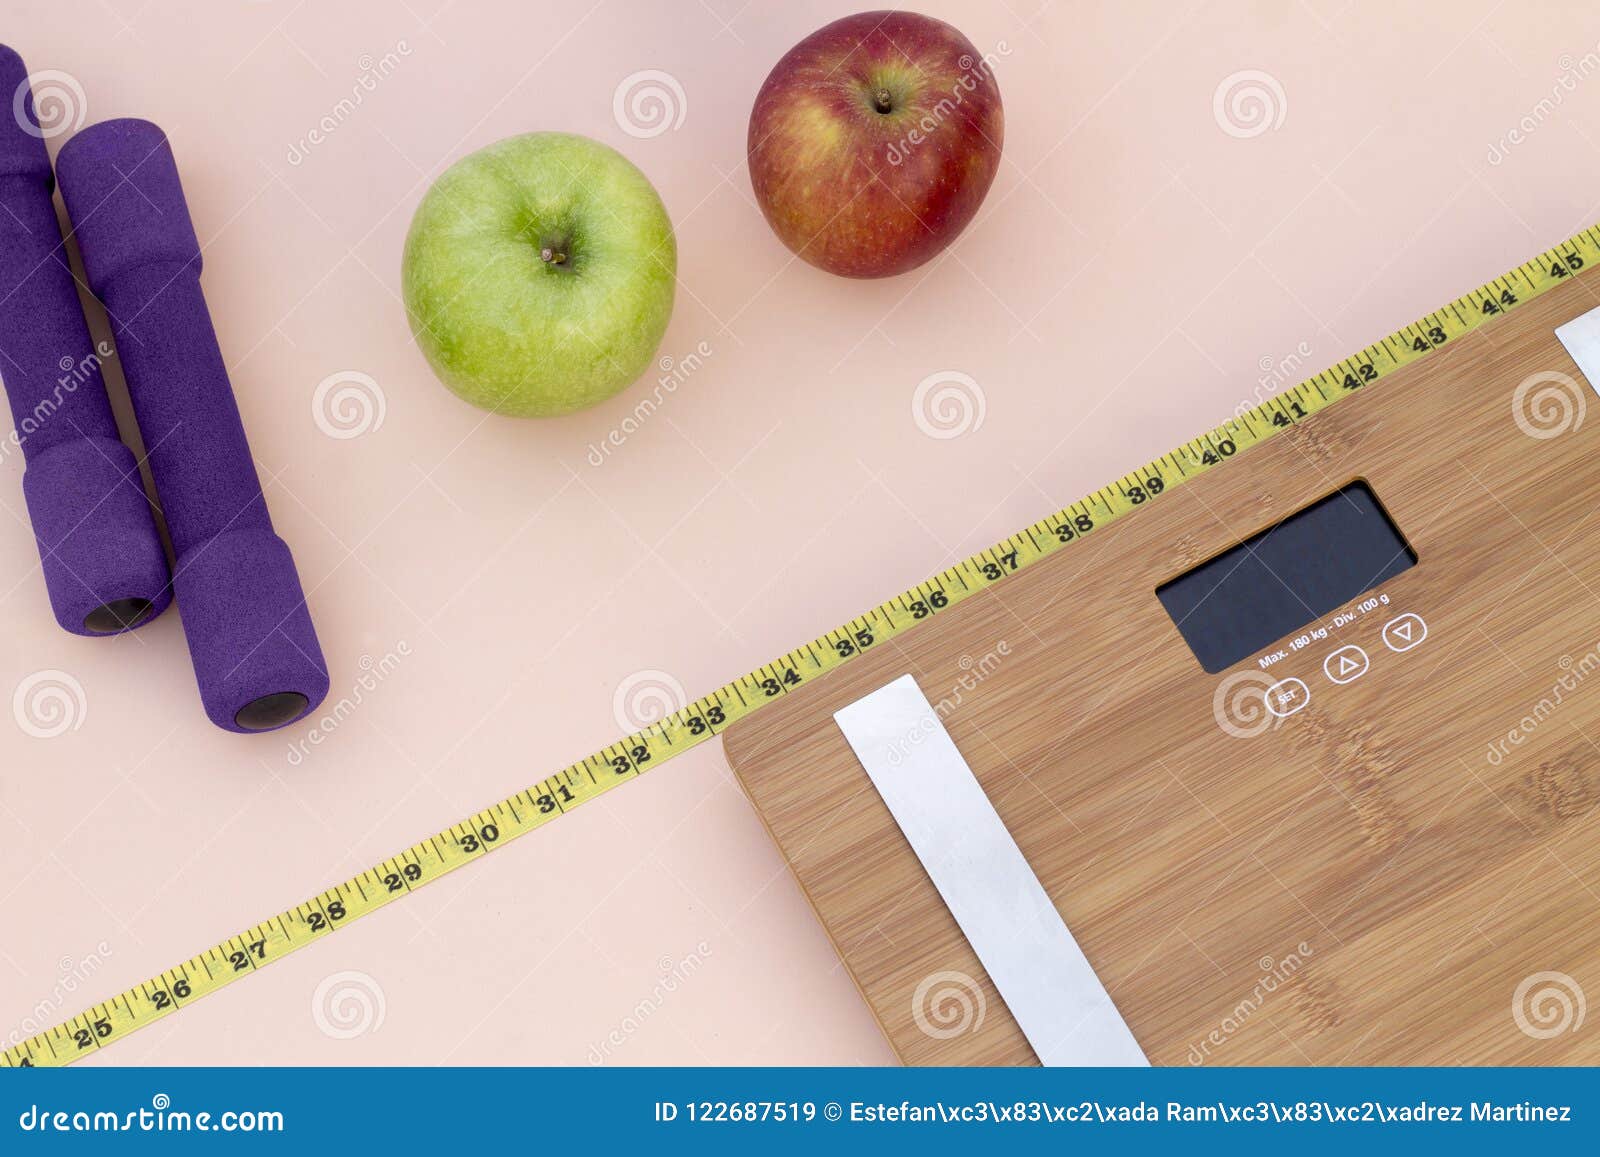 still life photography with apples, weight tape measure and a scale